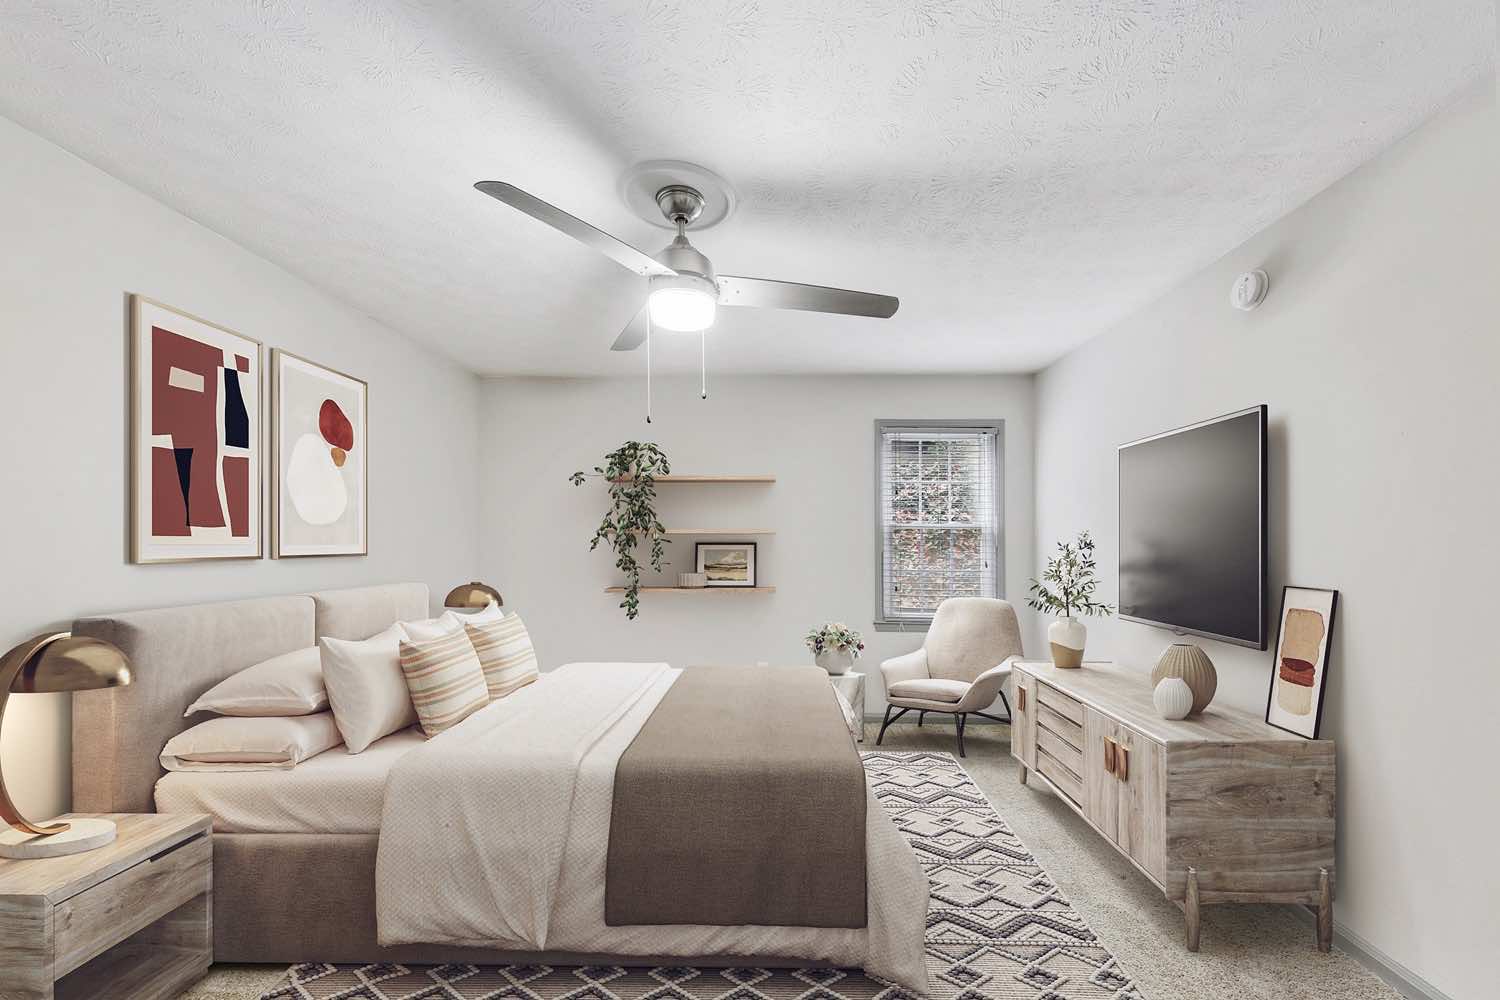 model bedroom with wood-style flooring and ceiling fan